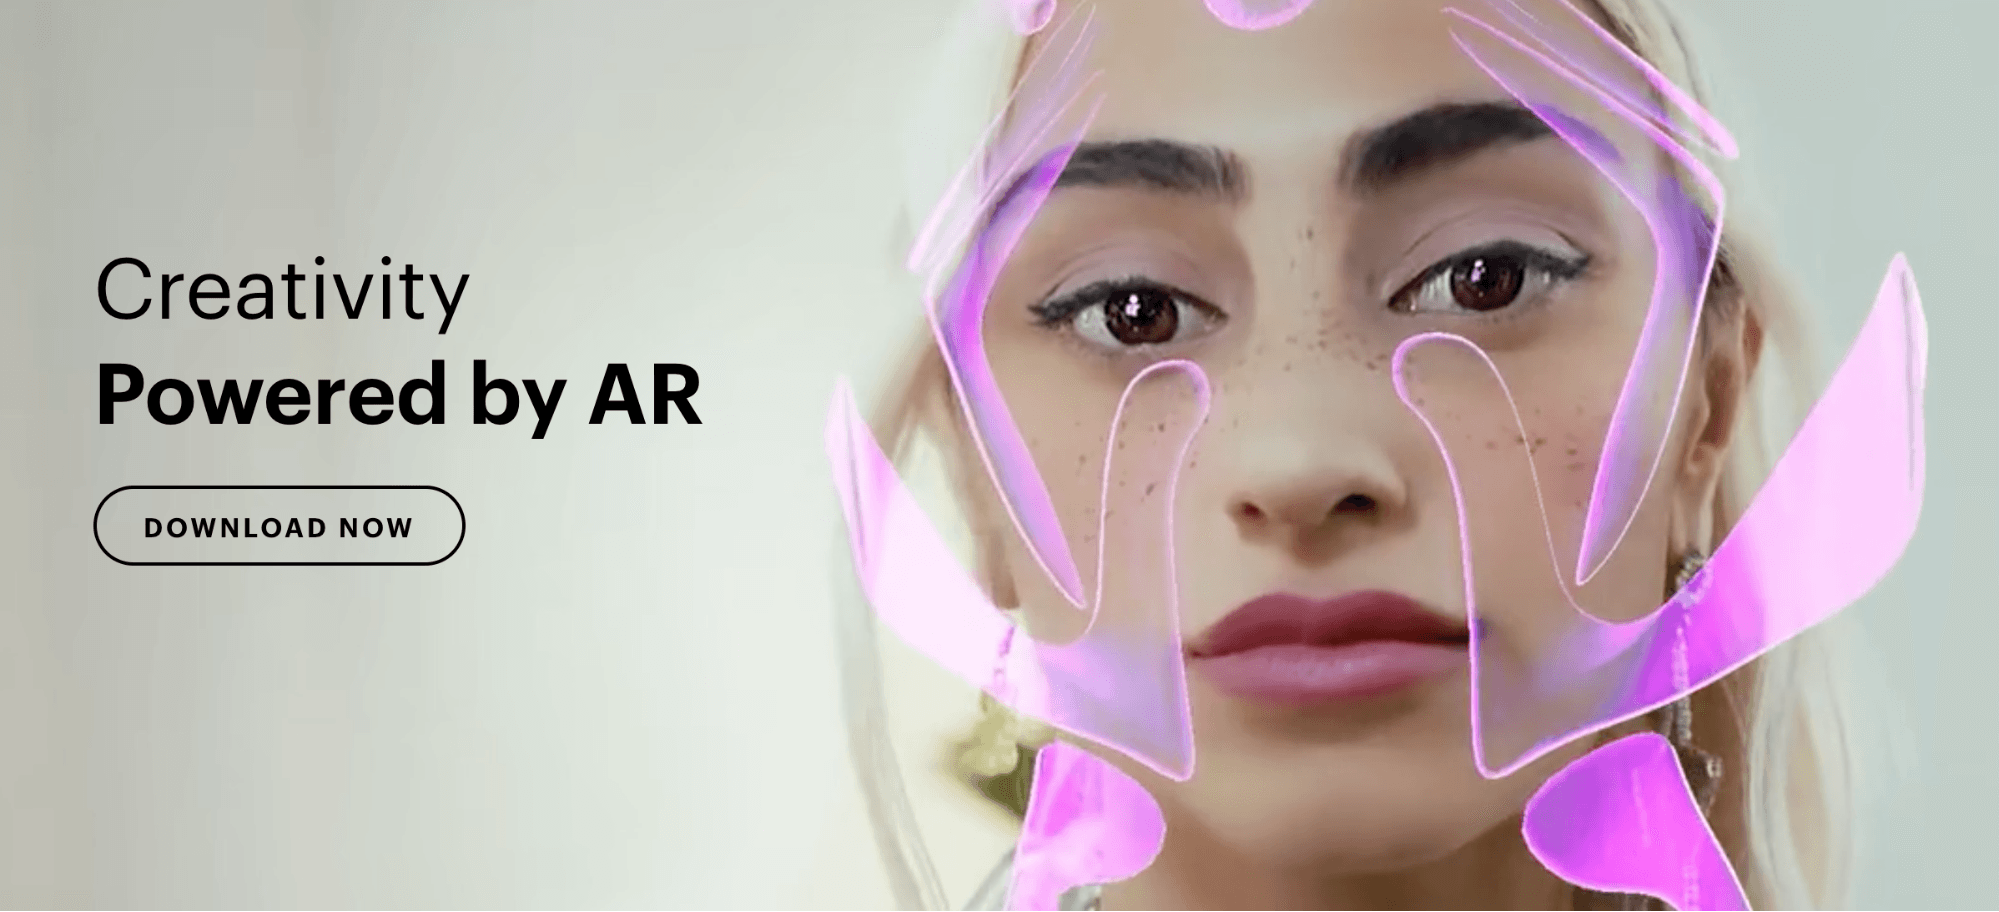 Snapchat ad showing a young woman generated by AR